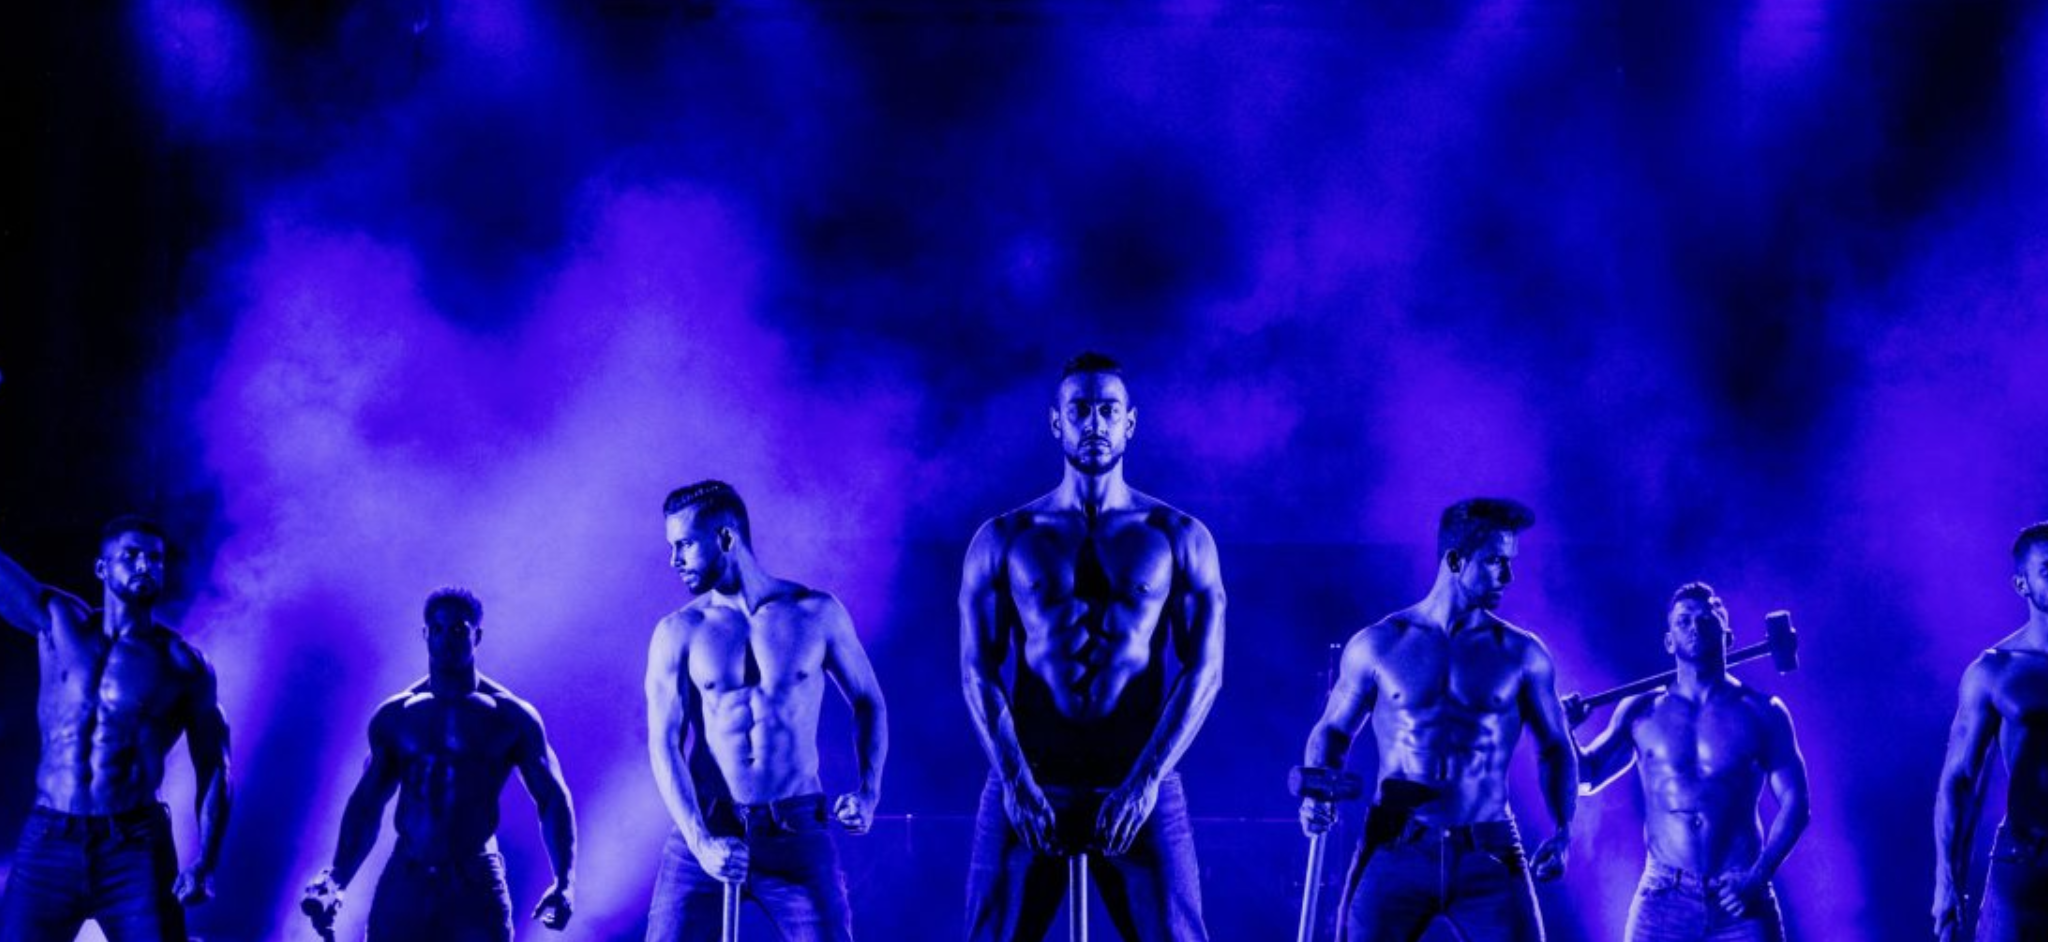 THE CHIPPENDALES am 7. November 2022 @ Helmut-List-Halle.